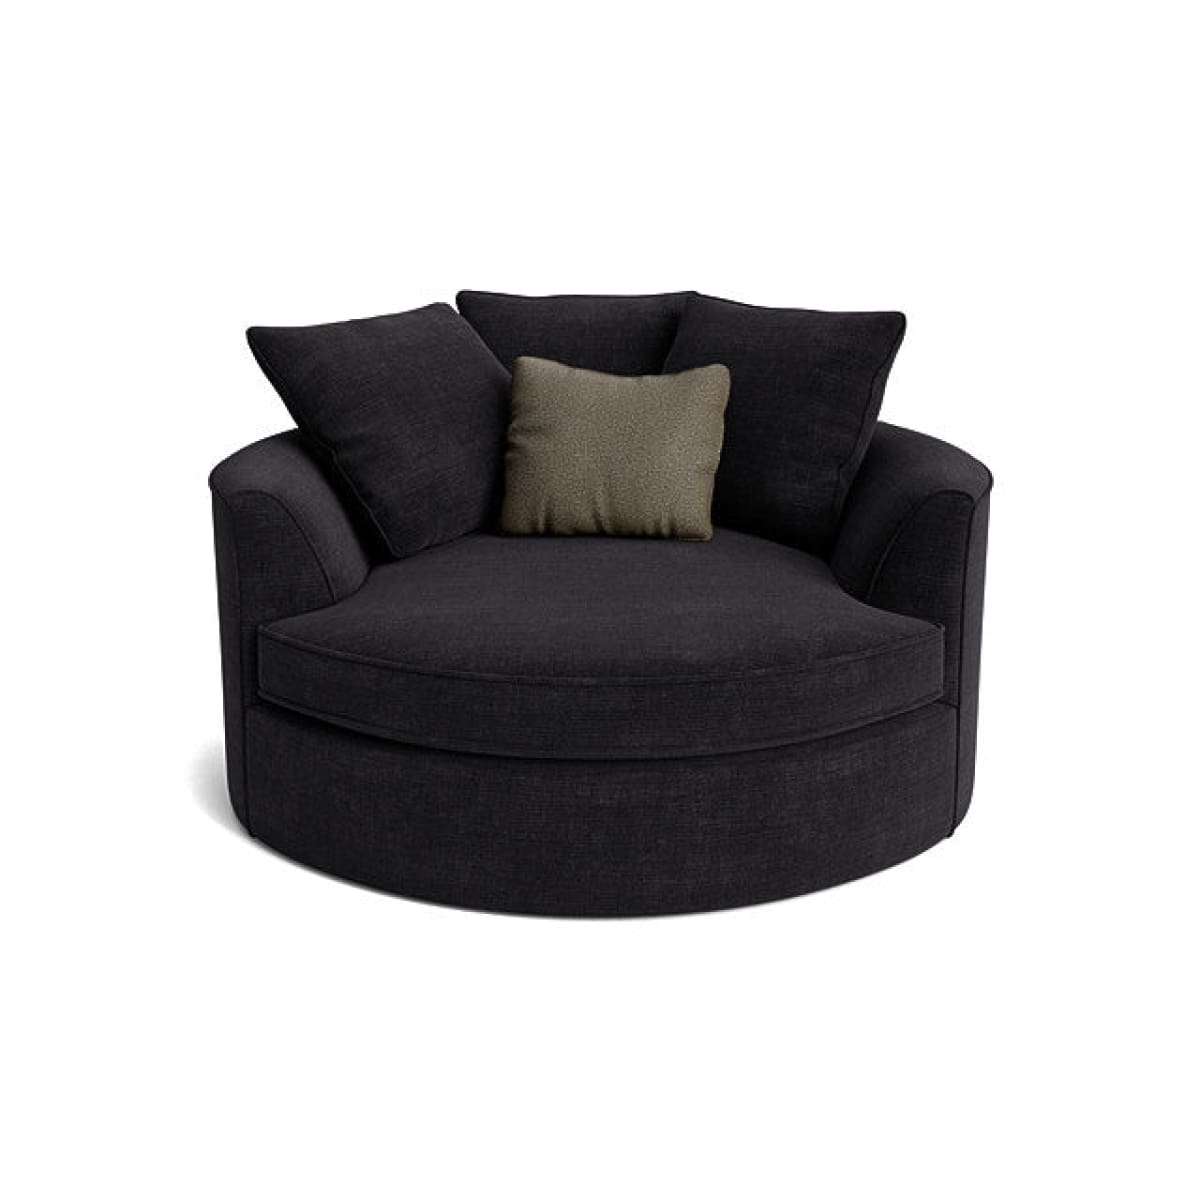 Nest Accent Chair - Analogy Onyx